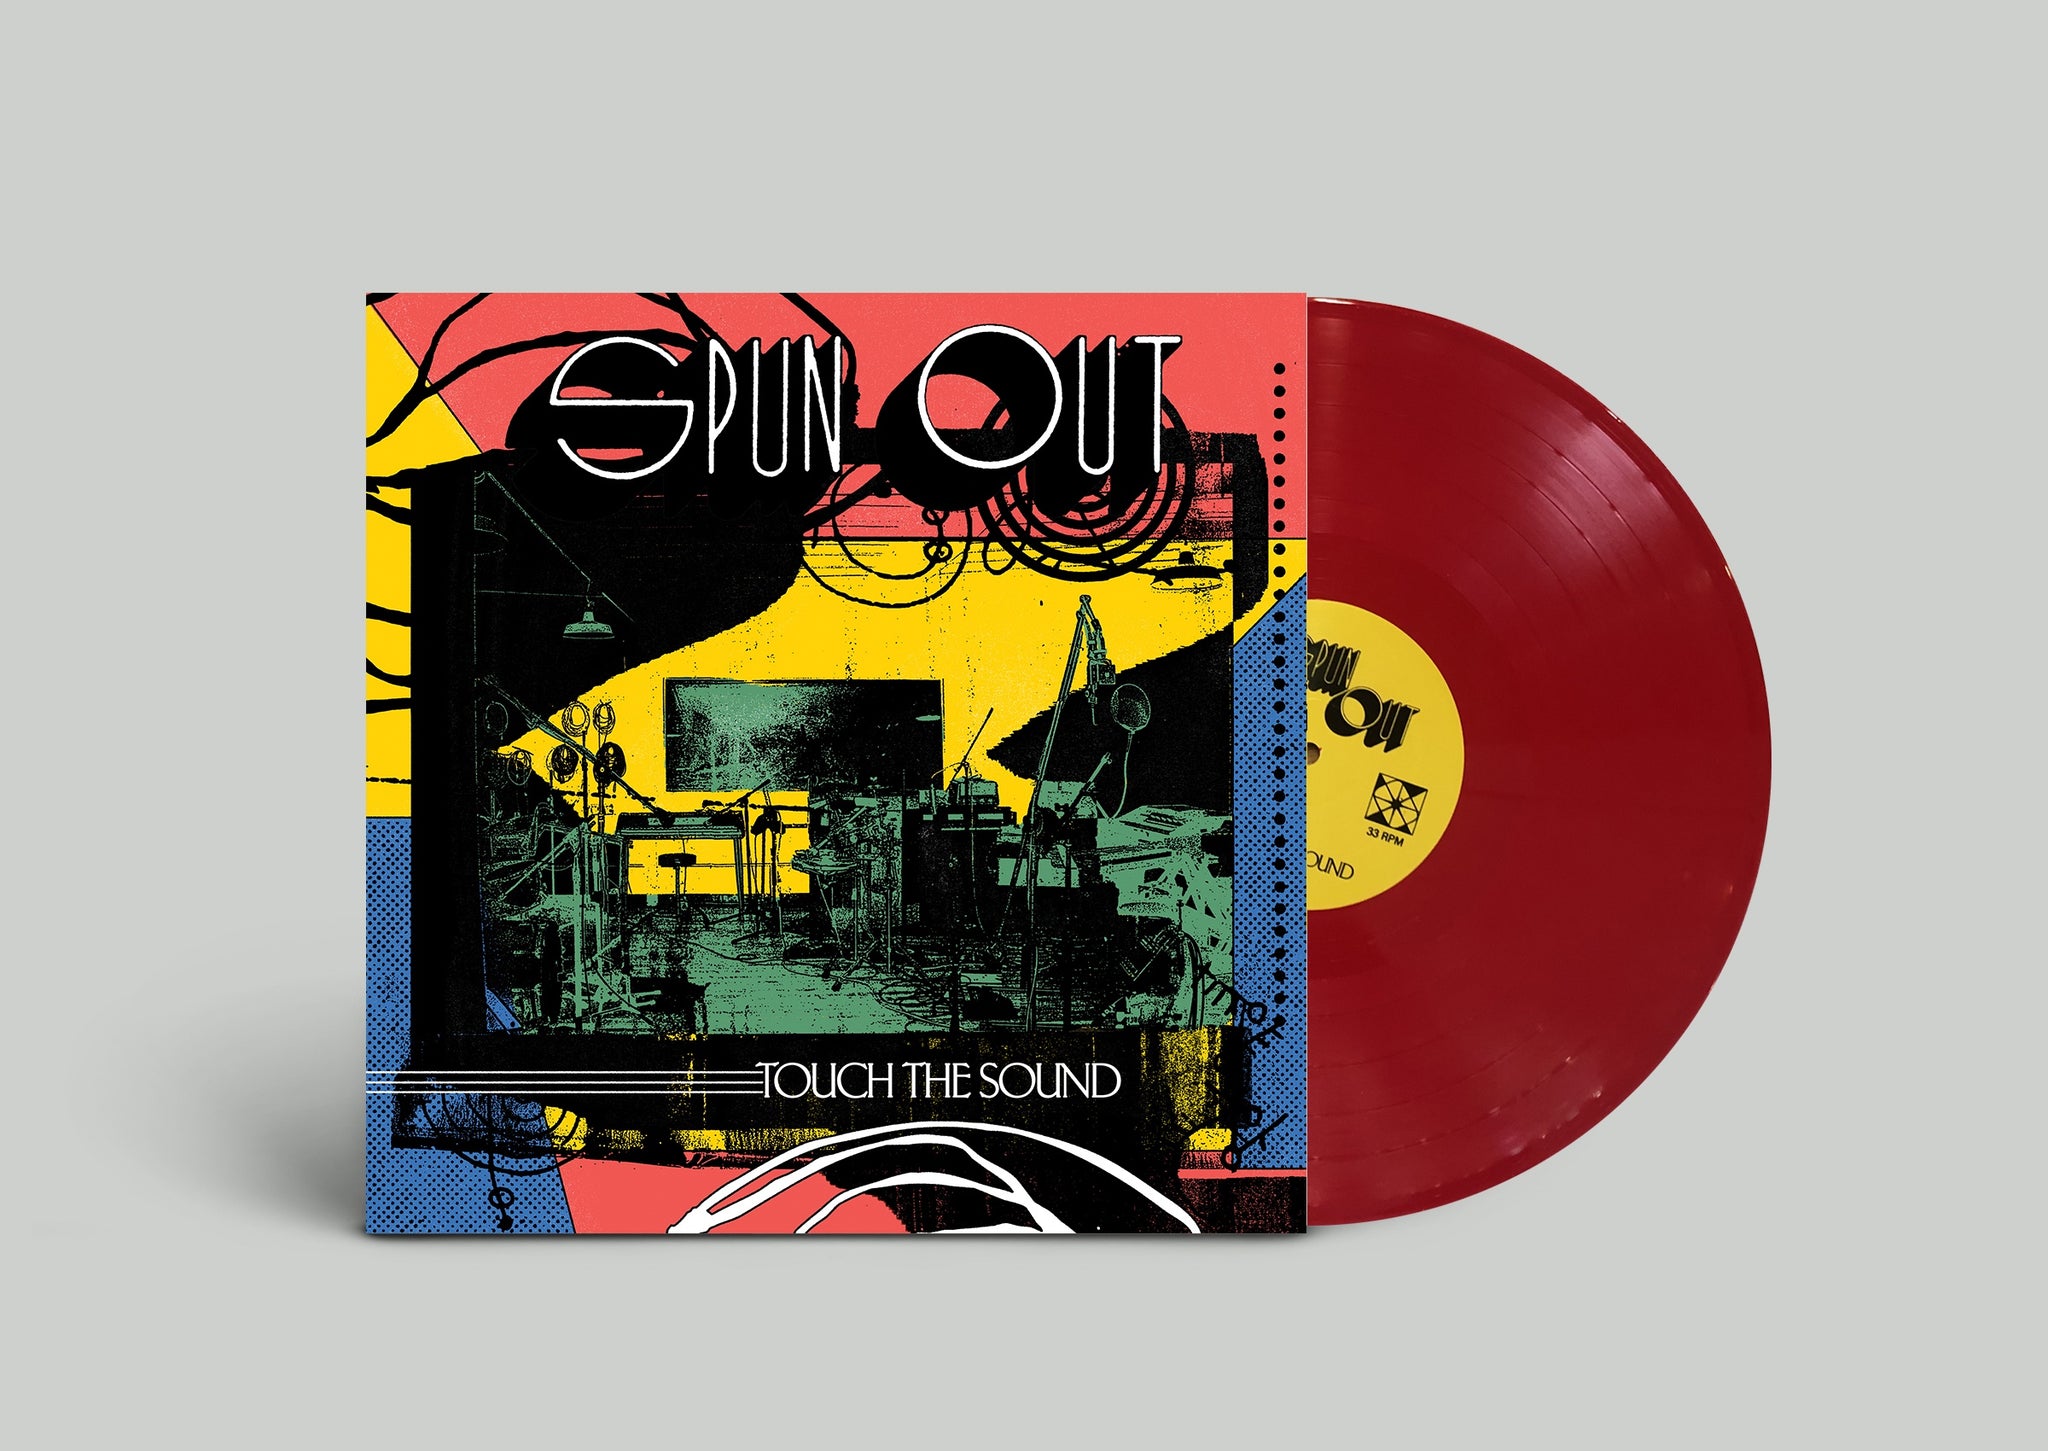 Spun Out ‎– Touch the Sound - New LP Record 2020 Shuga Records Raspberry Red Vinyl, Numbered & Insert - Chicago Indie Rock / Pop Rock / Psychedelic Rock